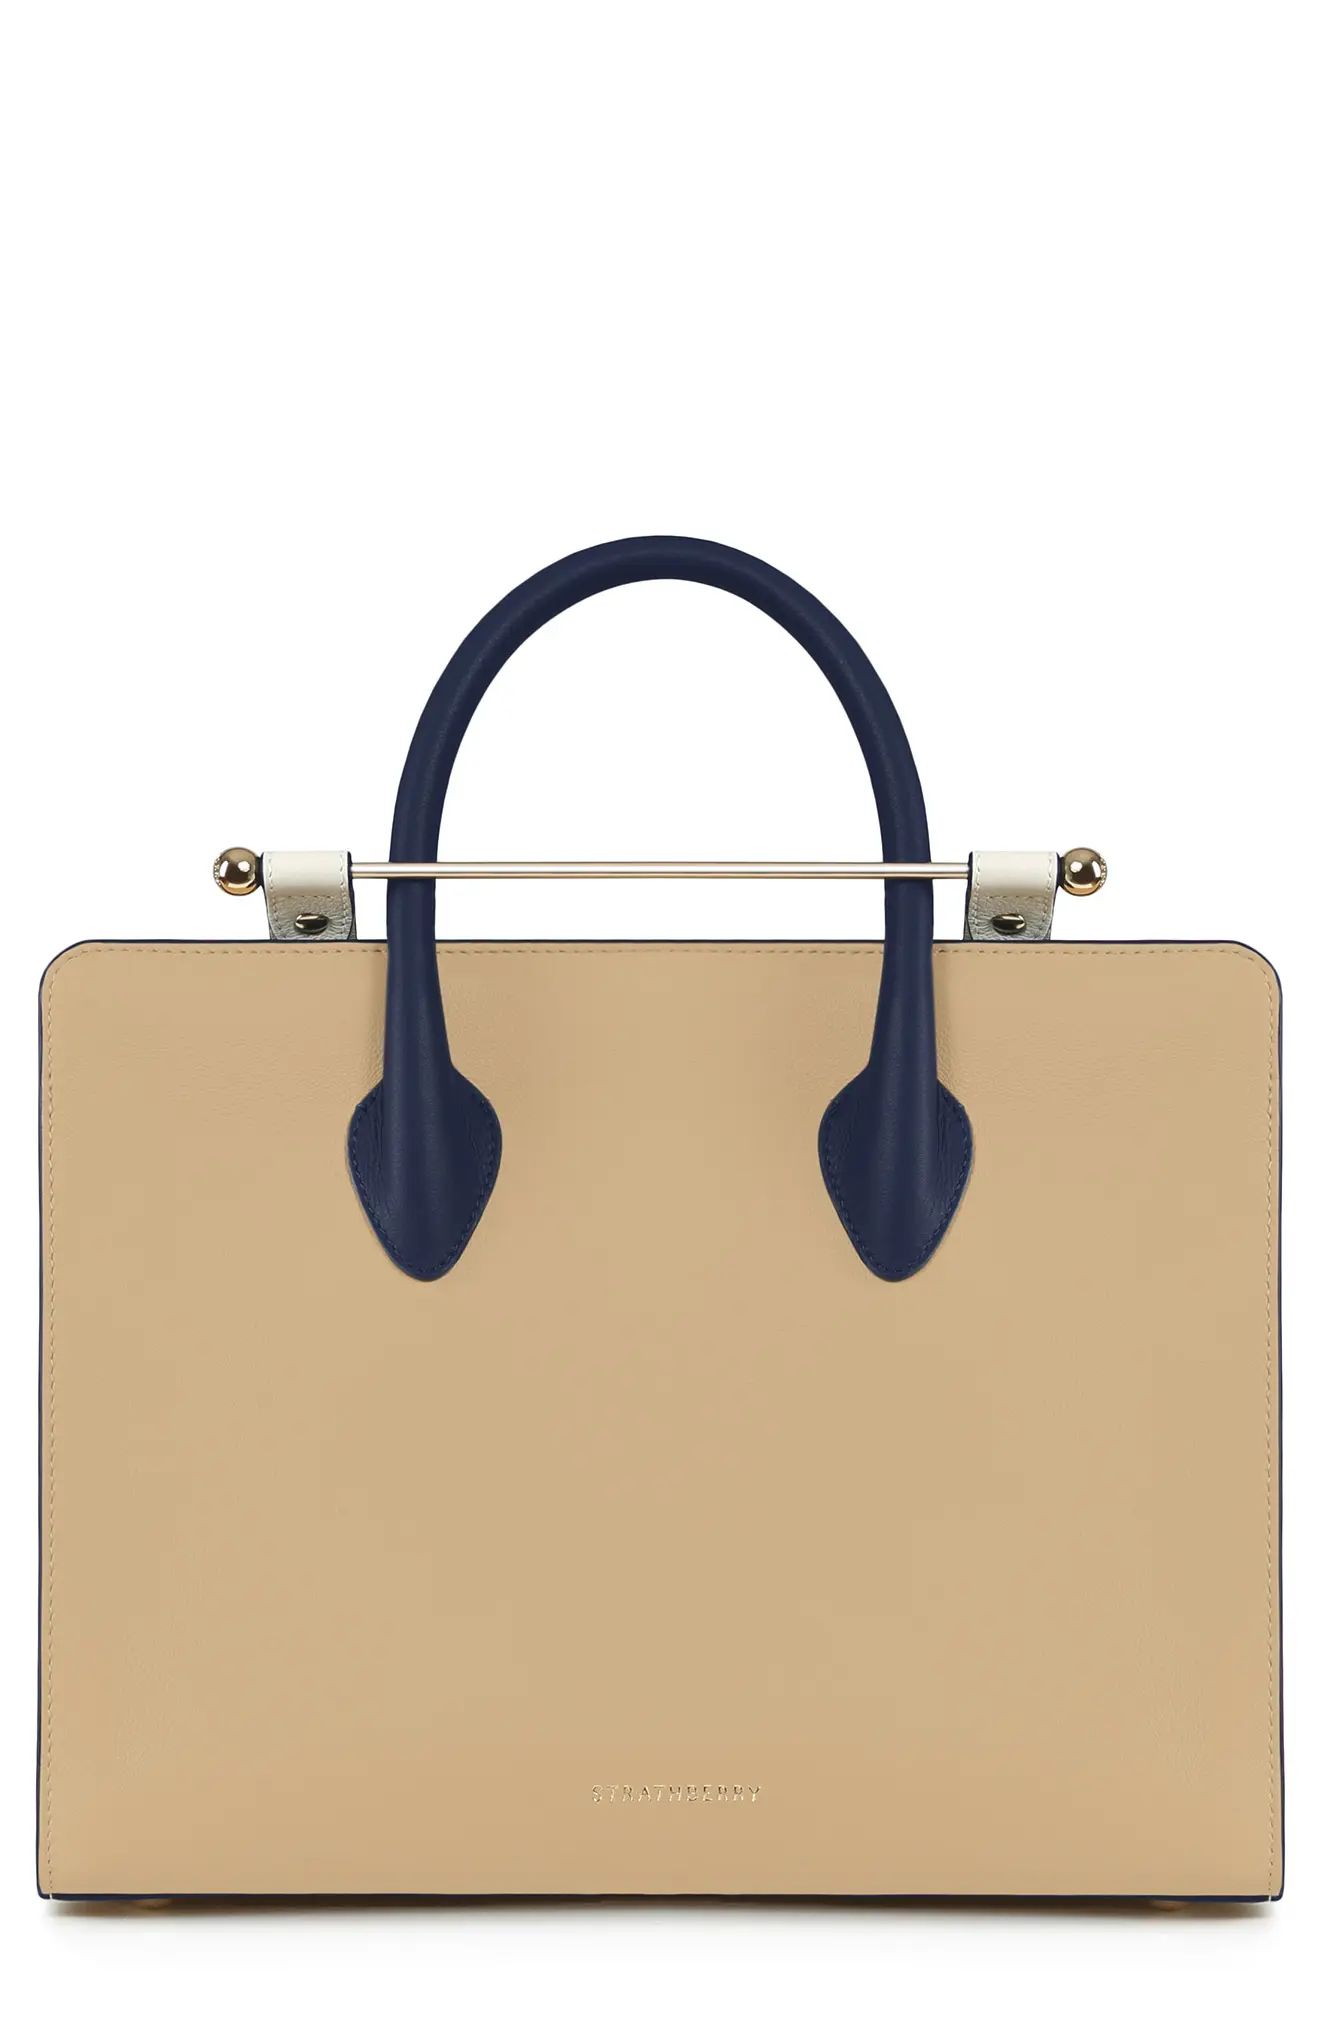 Strathberry Midi Tricolor Leather Tote in Latte/Vanilla/Navy at Nordstrom | Nordstrom